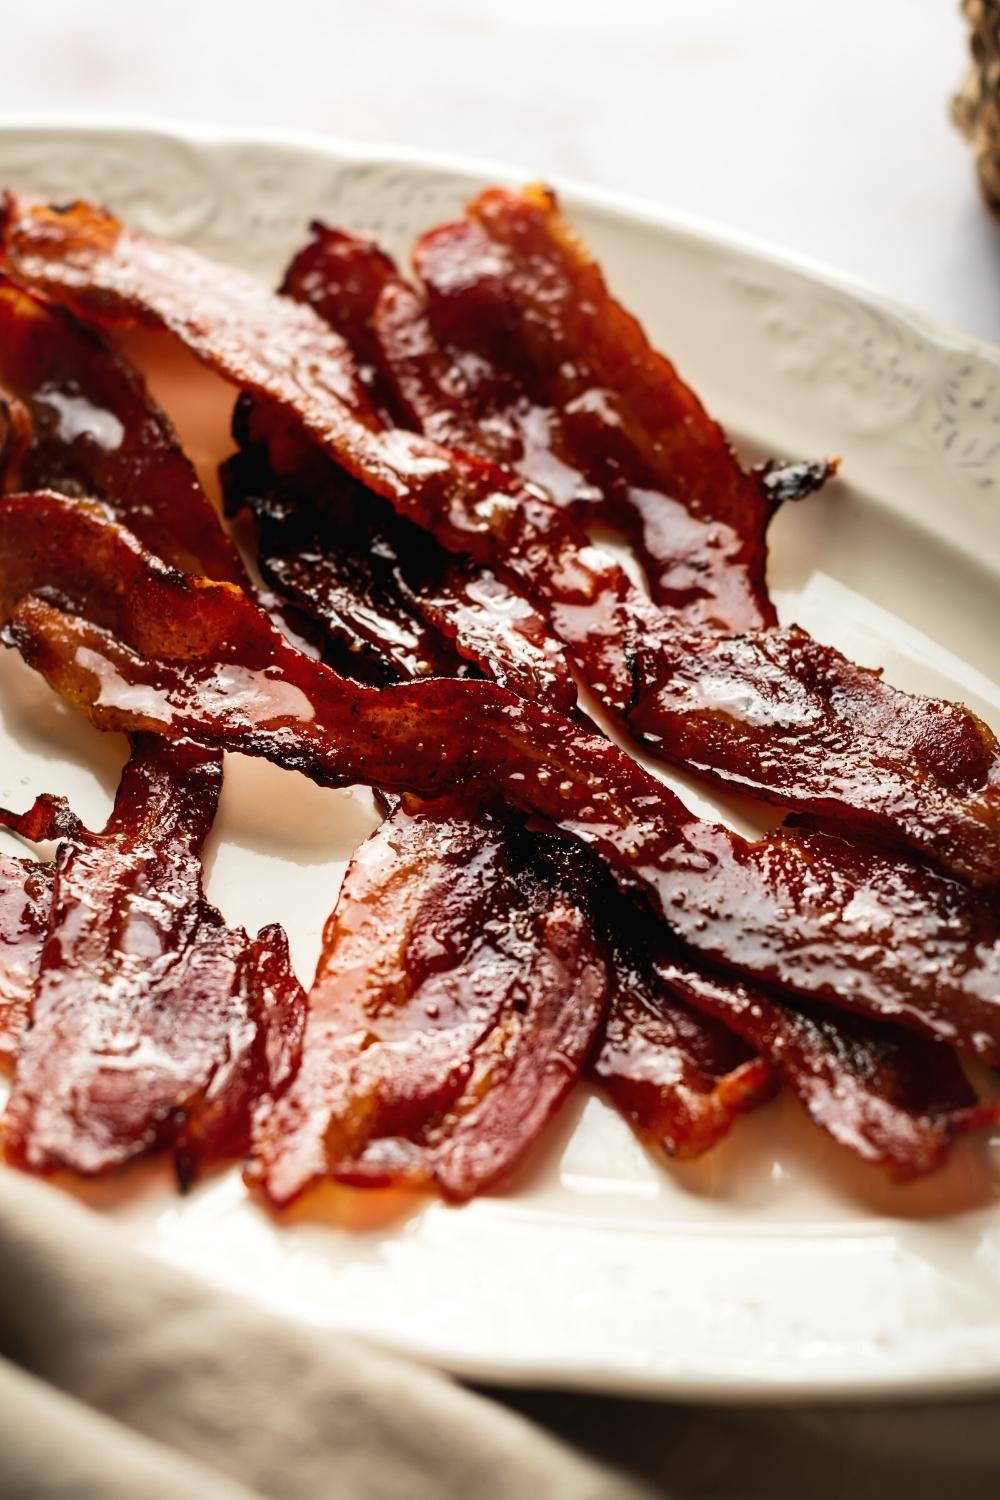 Slices of million Dollar bacon on a white plate.